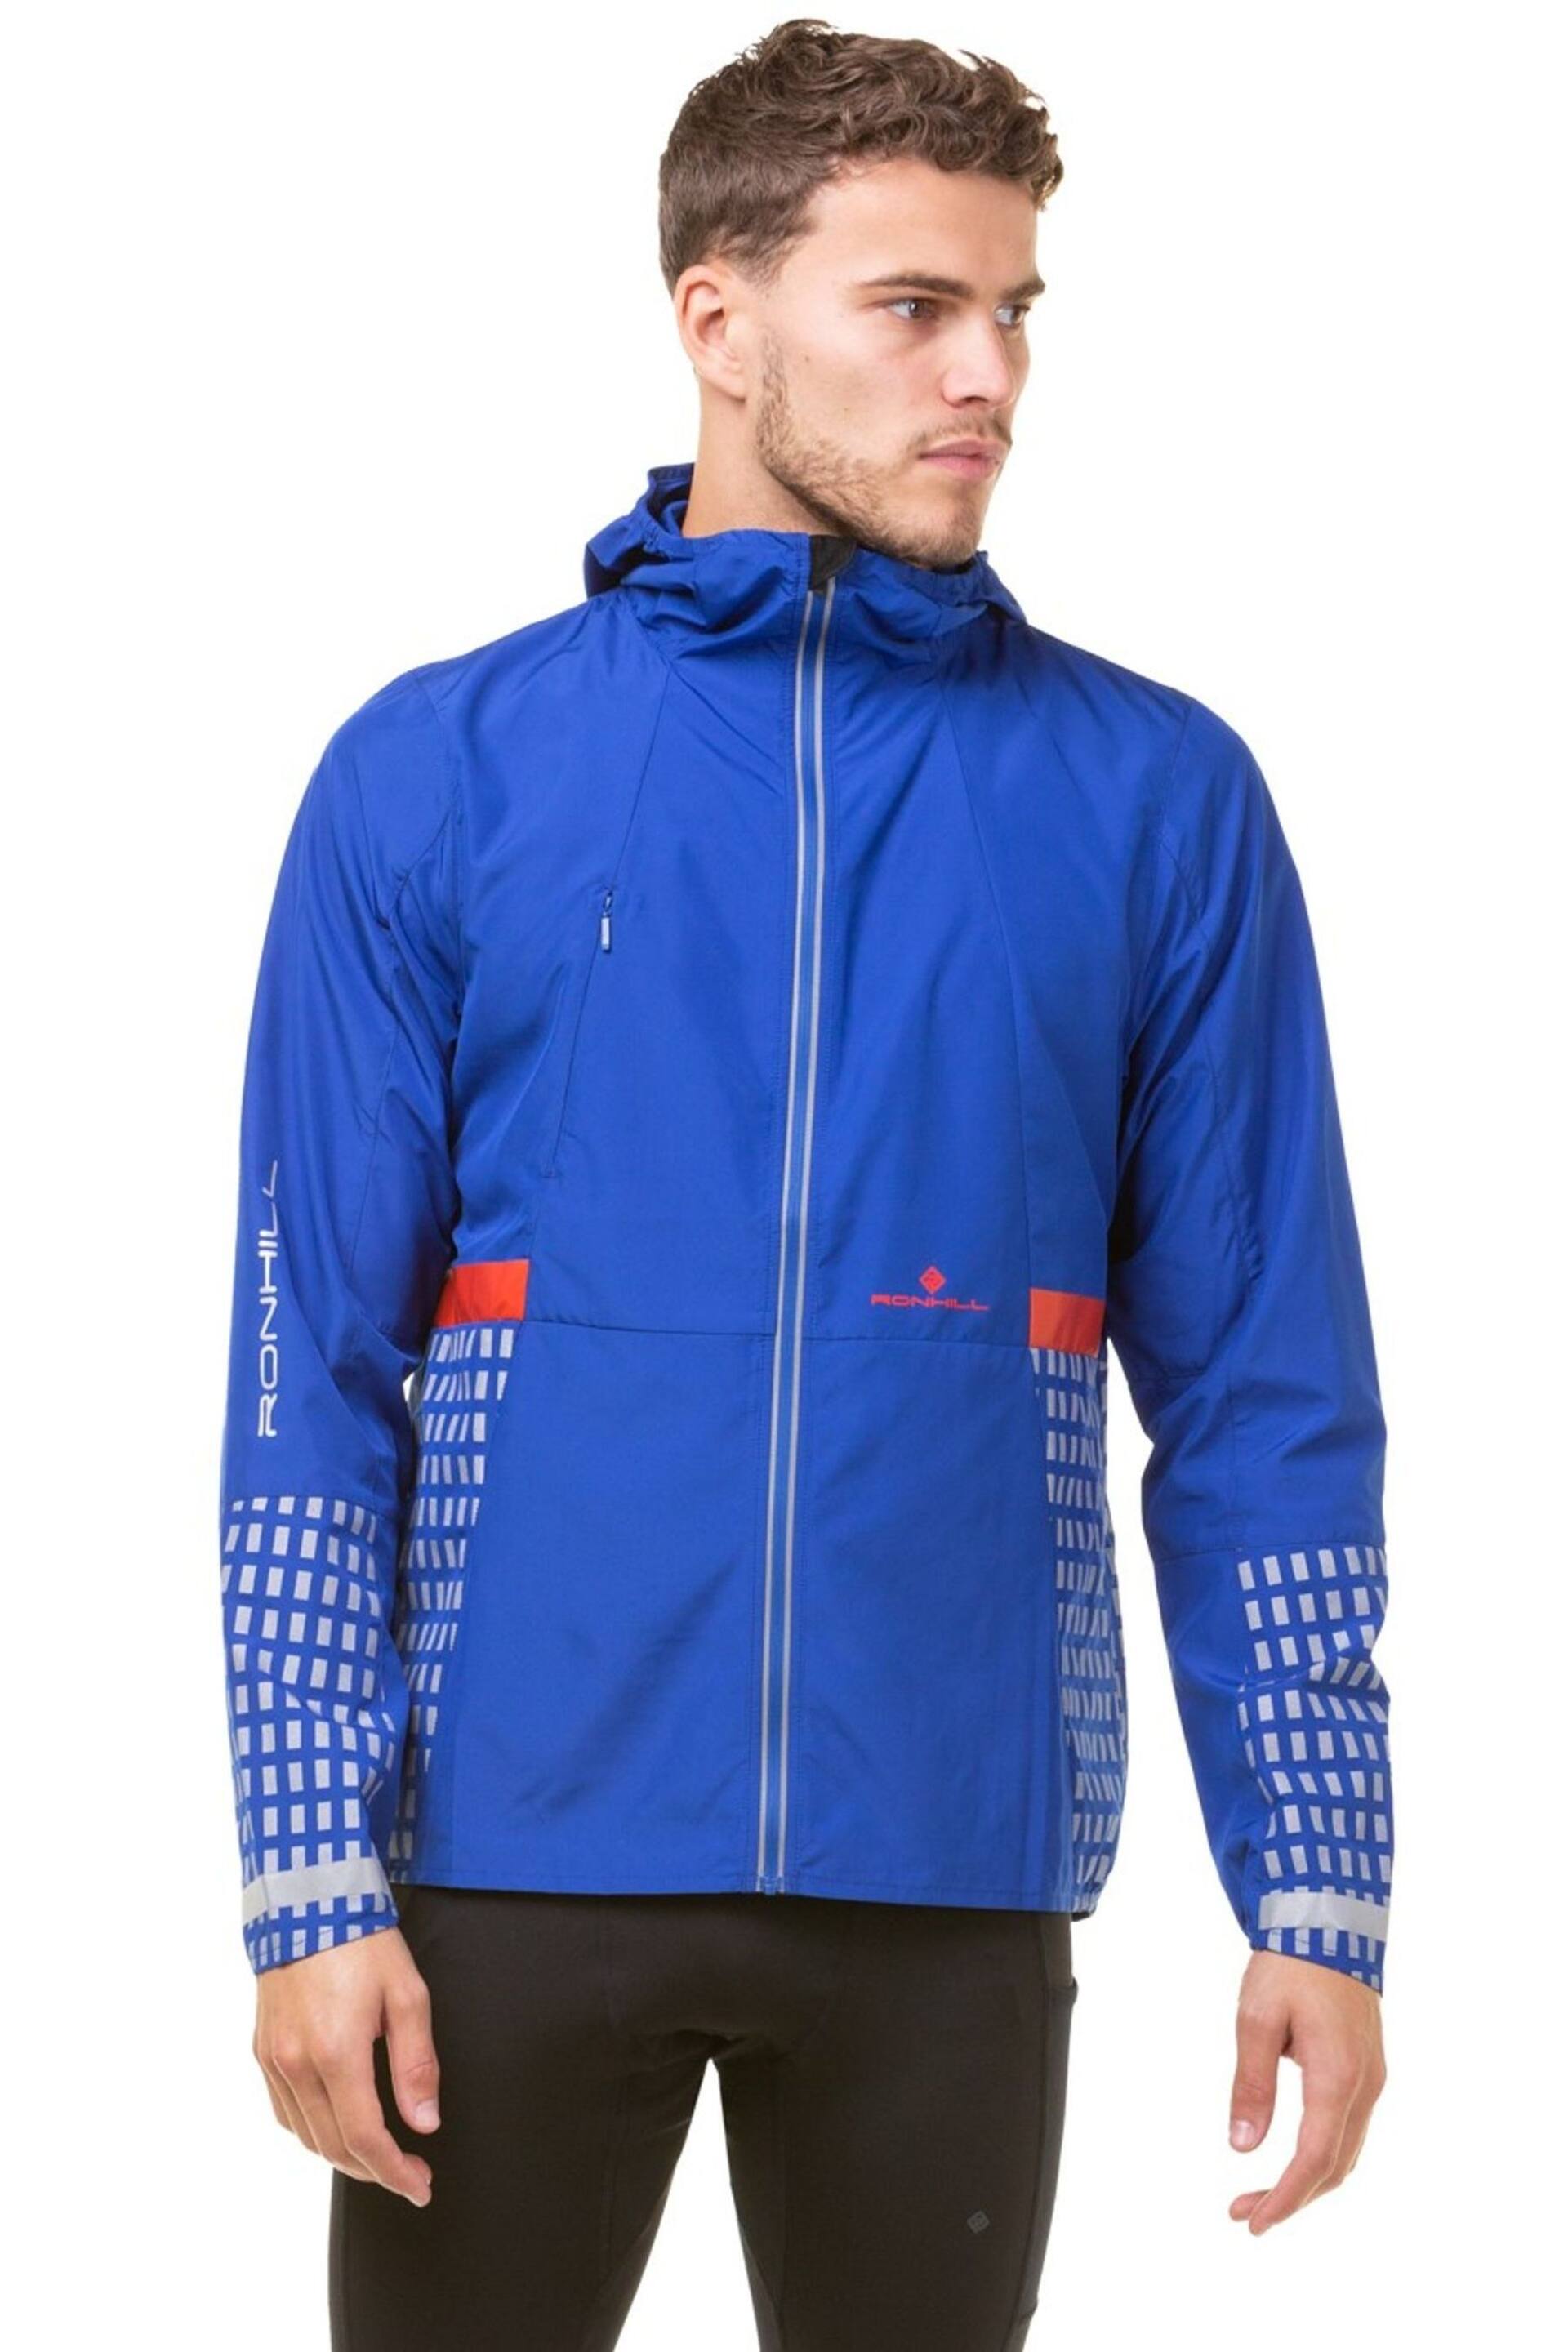 Ronhill Mens Blue Tech Reflective Afterhours Running Jacket - Image 4 of 6